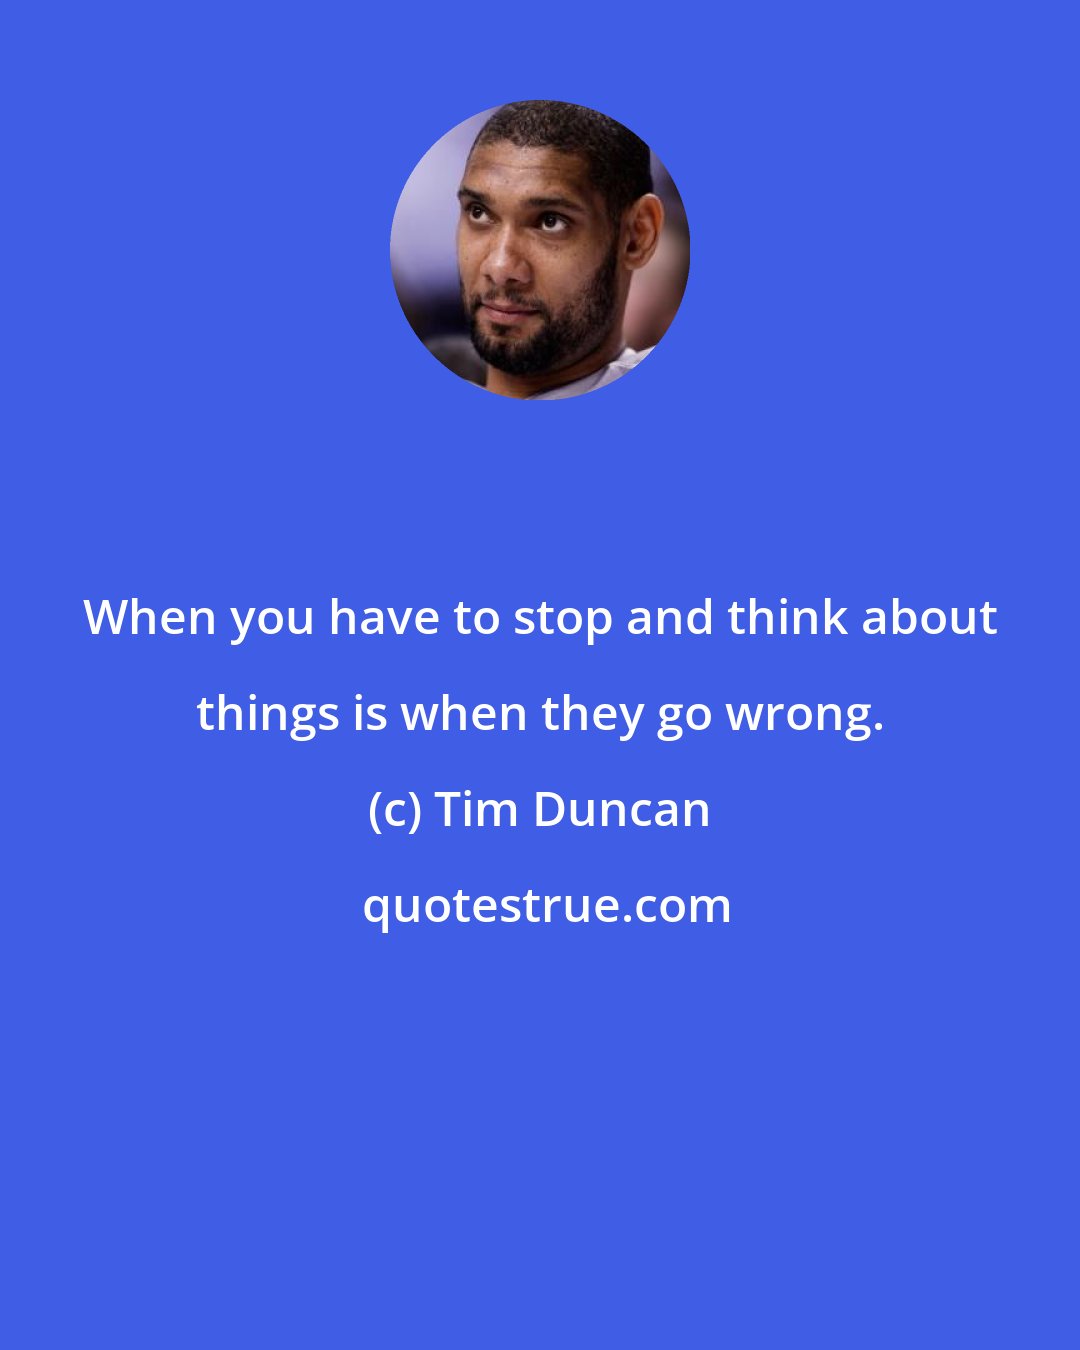 Tim Duncan: When you have to stop and think about things is when they go wrong.